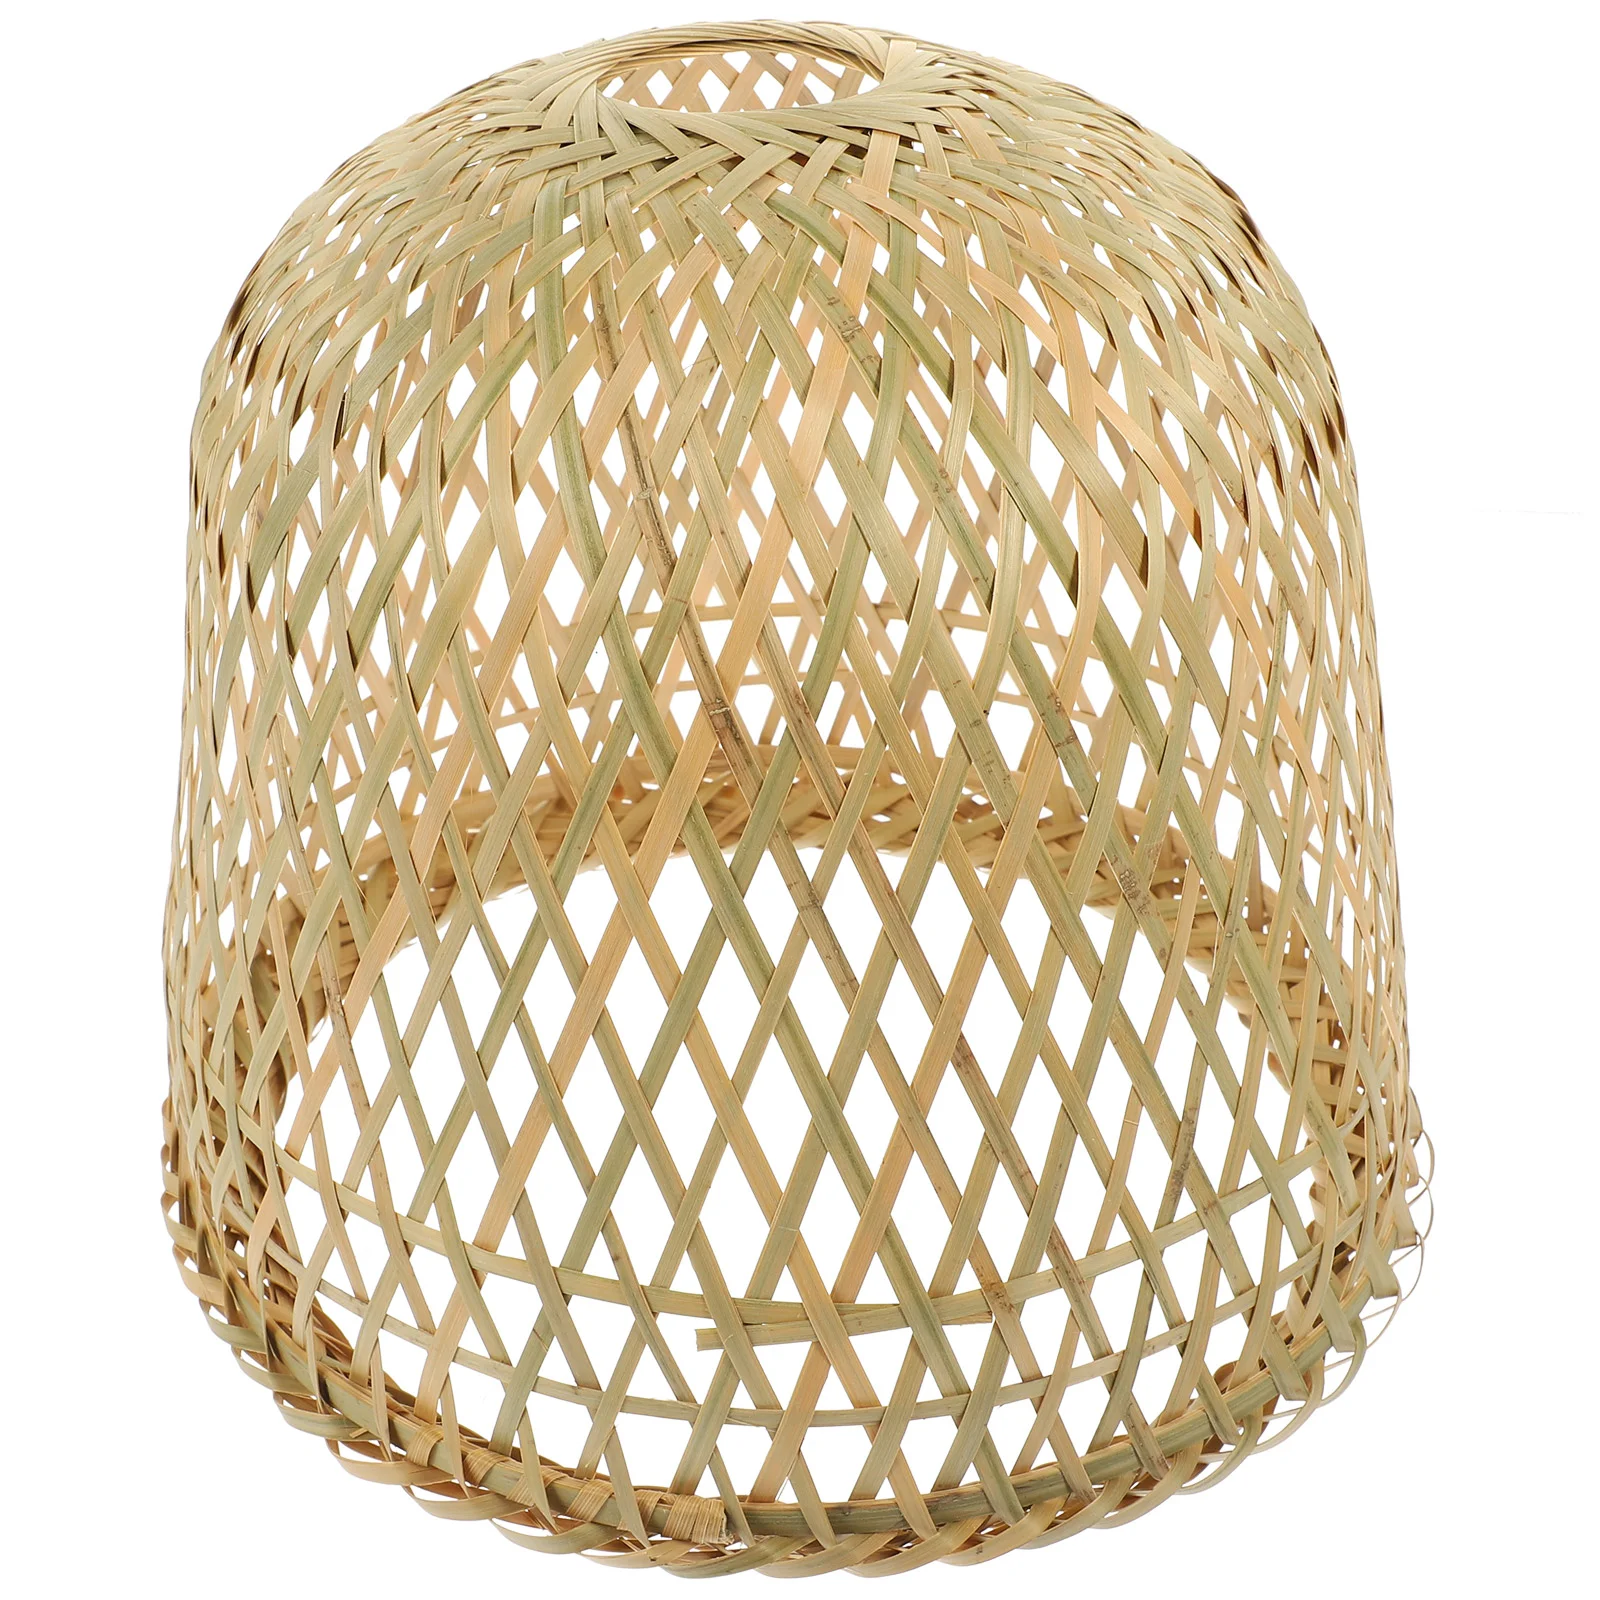 

Lamp Shade Light Cover Lampshade Pendant Bamboo Rattan Ceiling Shades Wicker Woven Vintage Decor Hanging Table Bulb Floor Cage